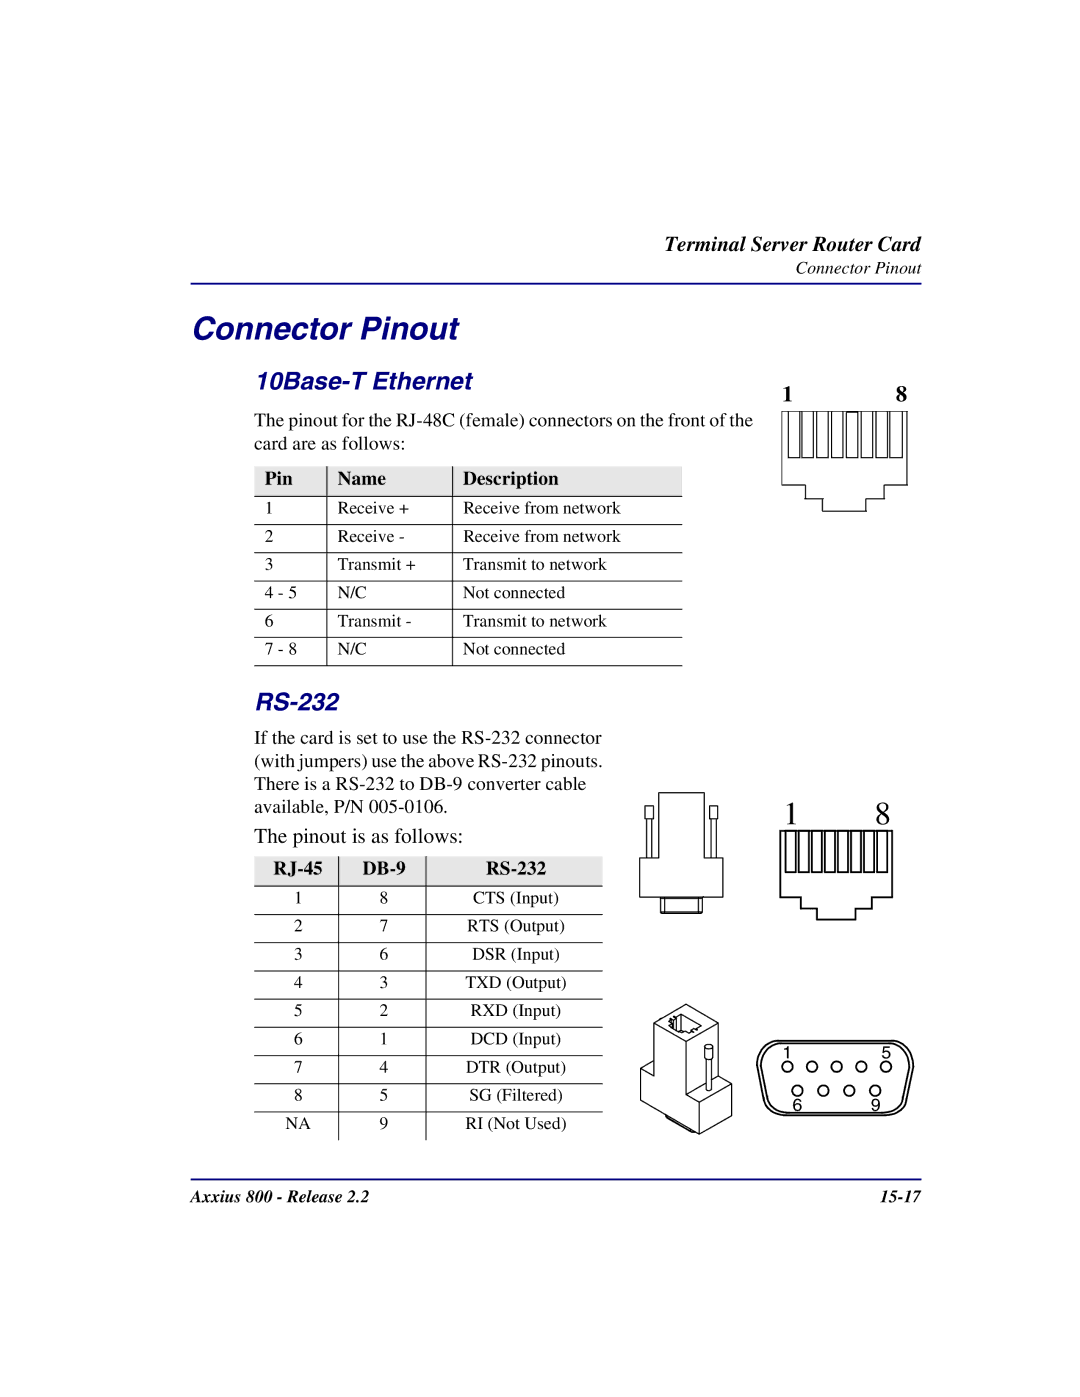 Carrier Access Axxius 800 user manual Connector Pinout, 10Base-T Ethernet, RS-232 